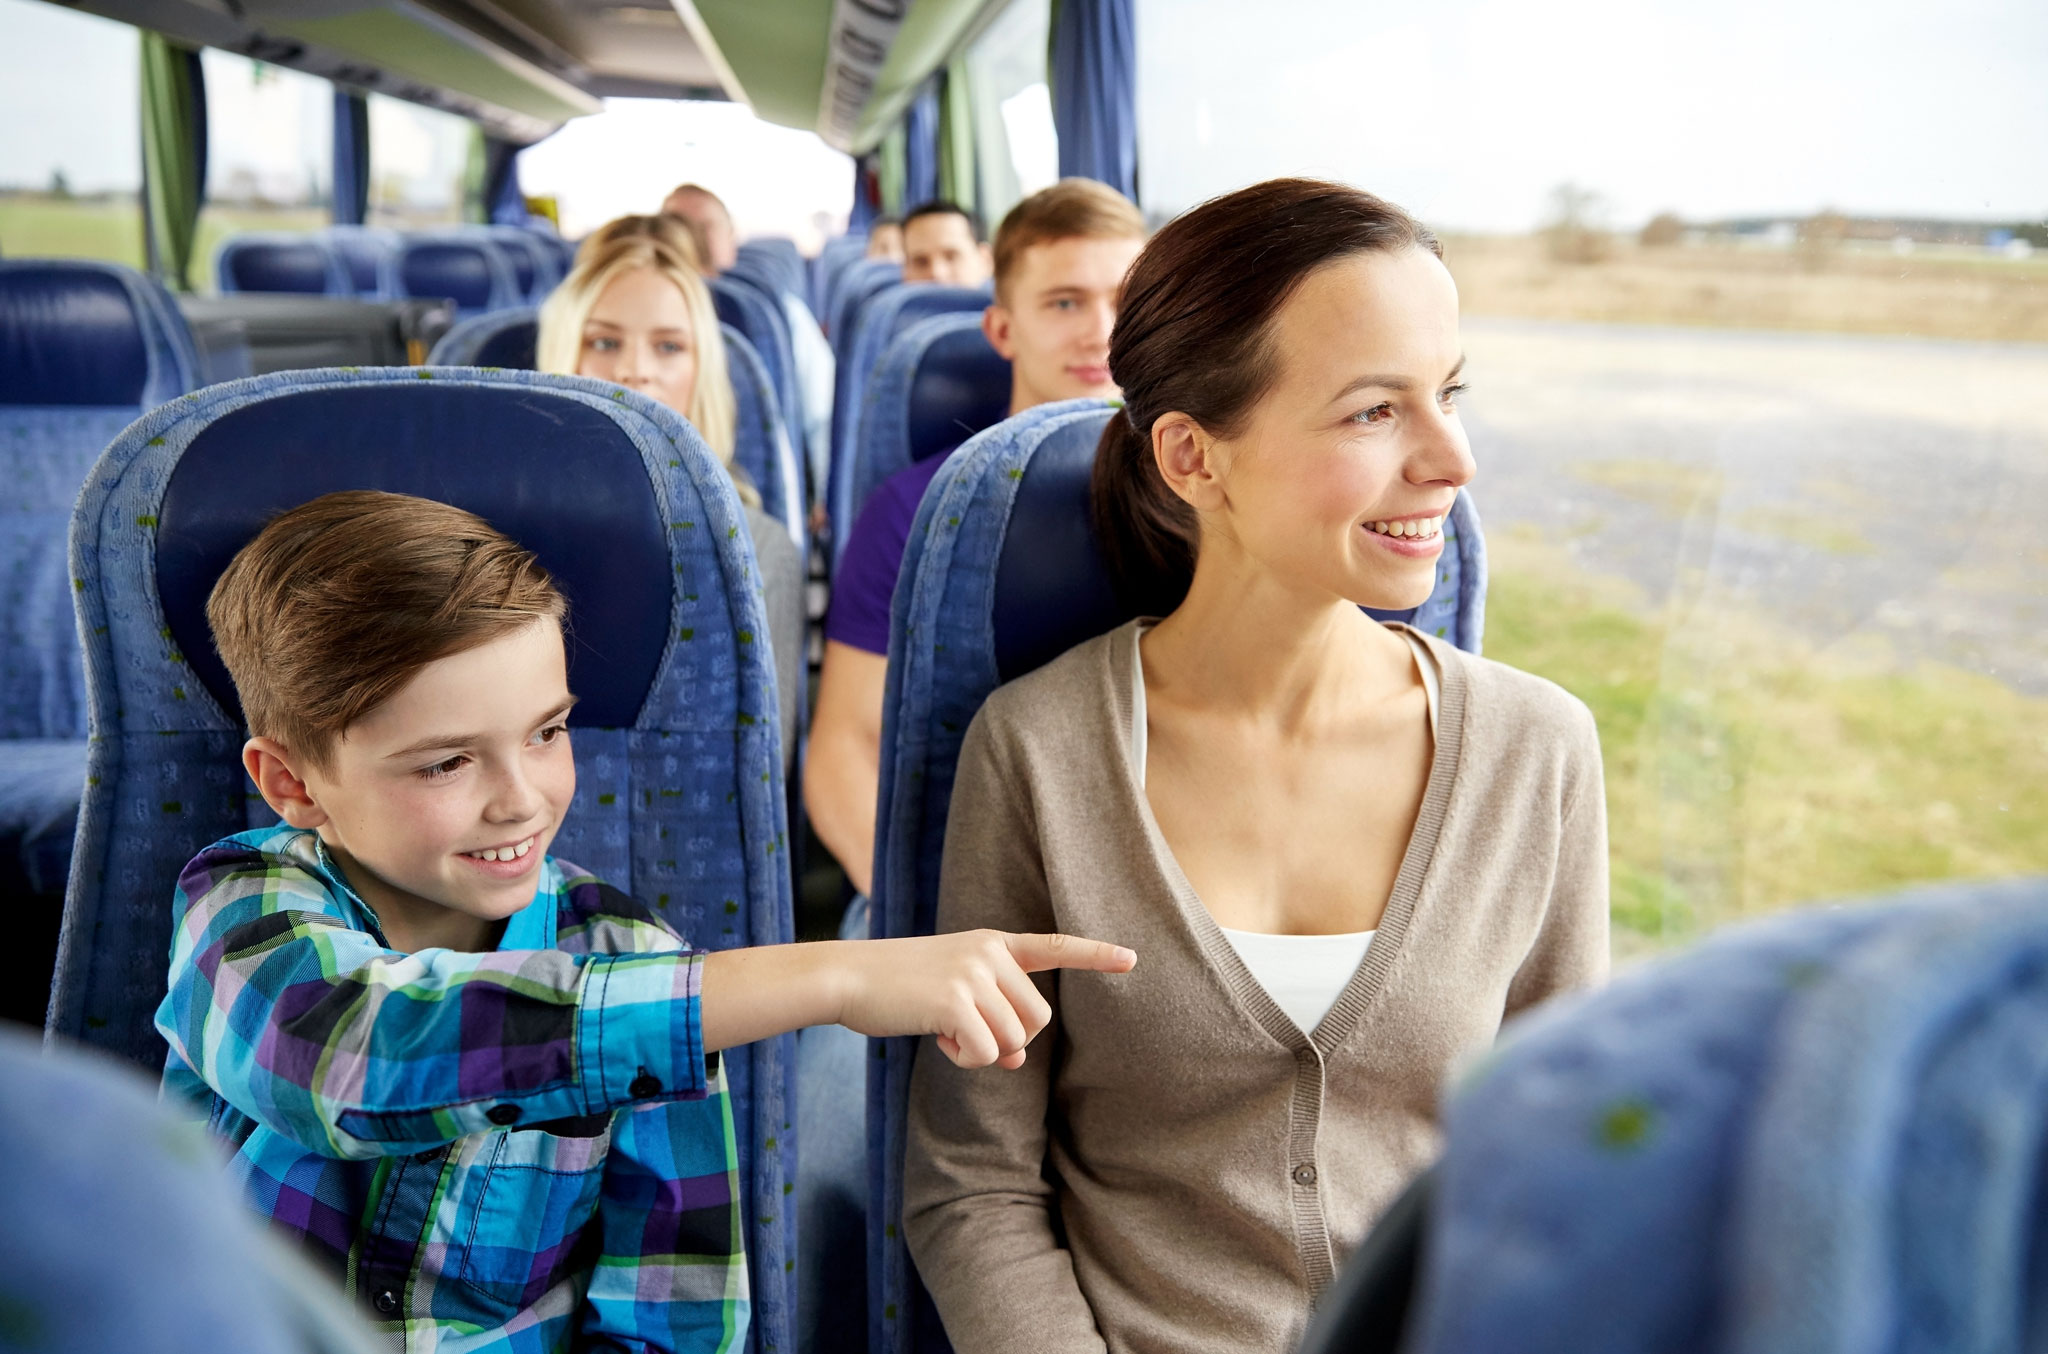 Explore with Comfort Local Coach and Day Tour Services for Memorable Adventures